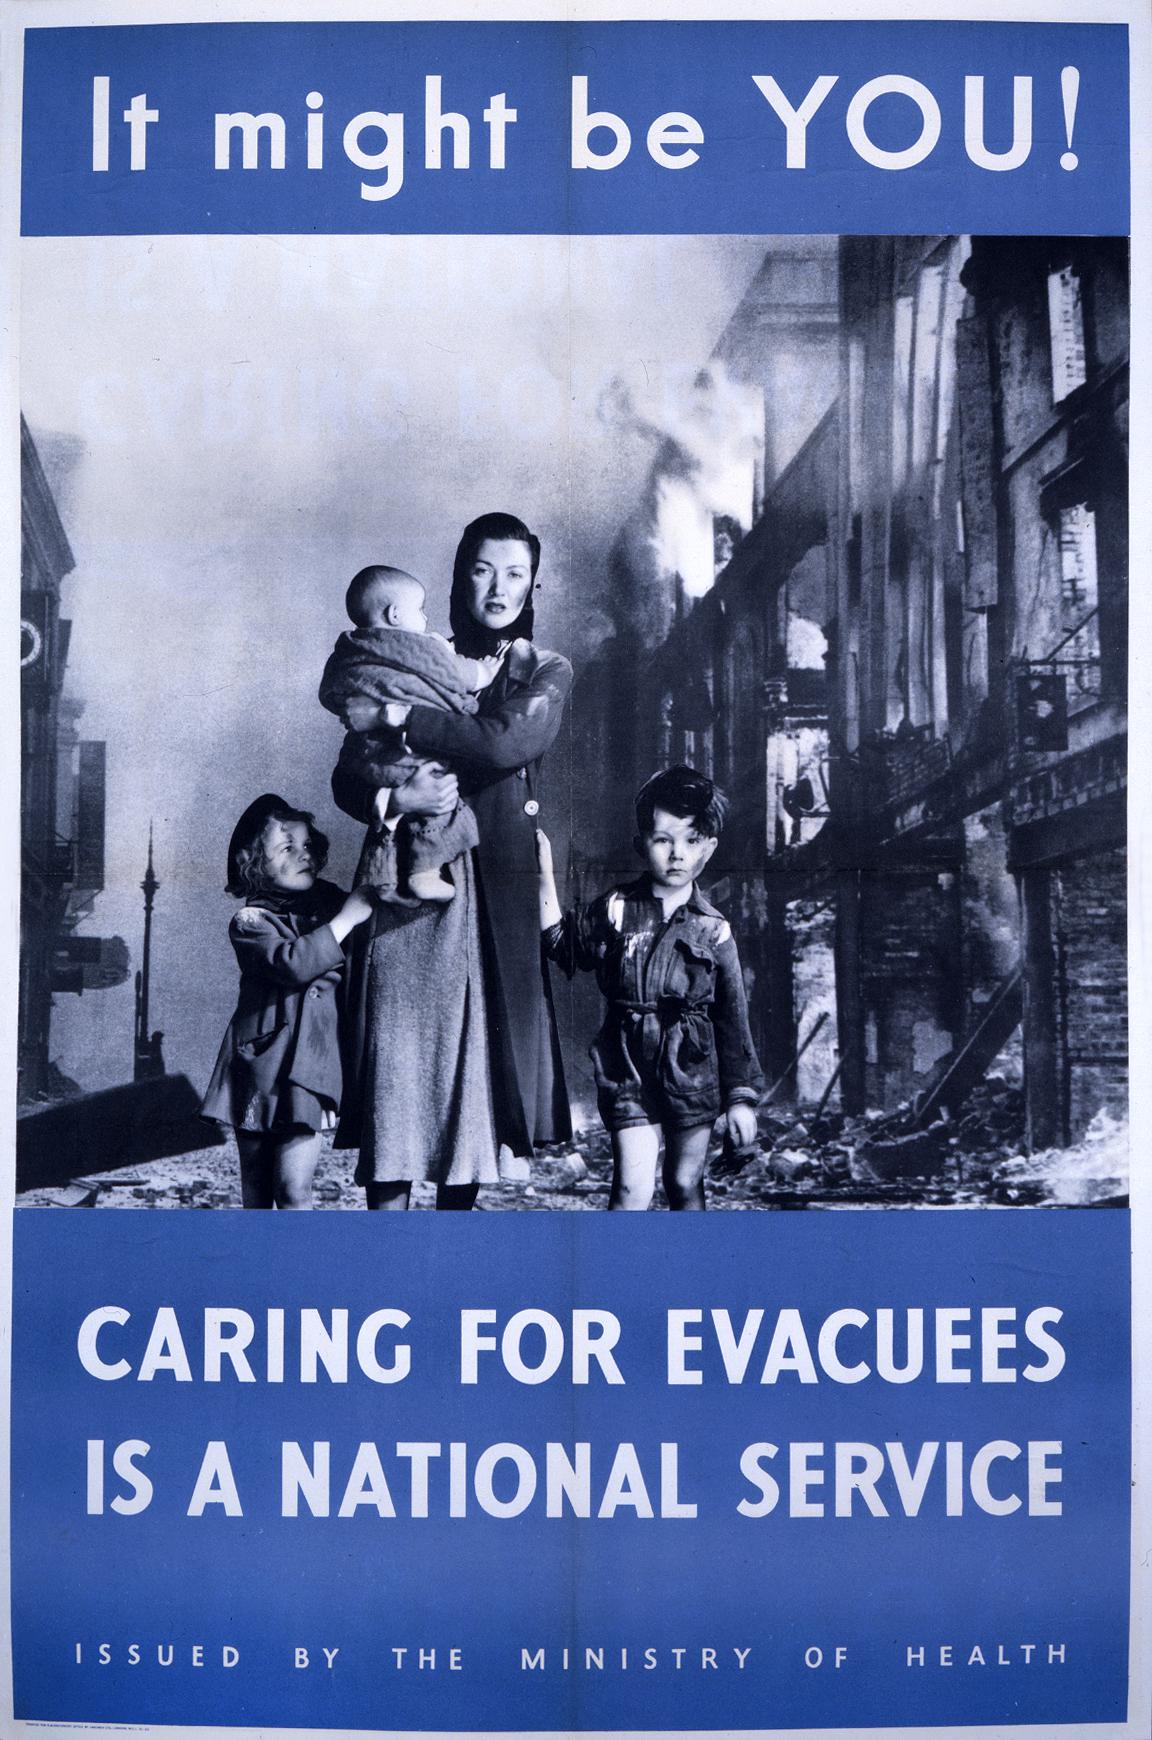 Poster featuring a monochrome image of a mother with three children covered in soot and walking away from a burning building.